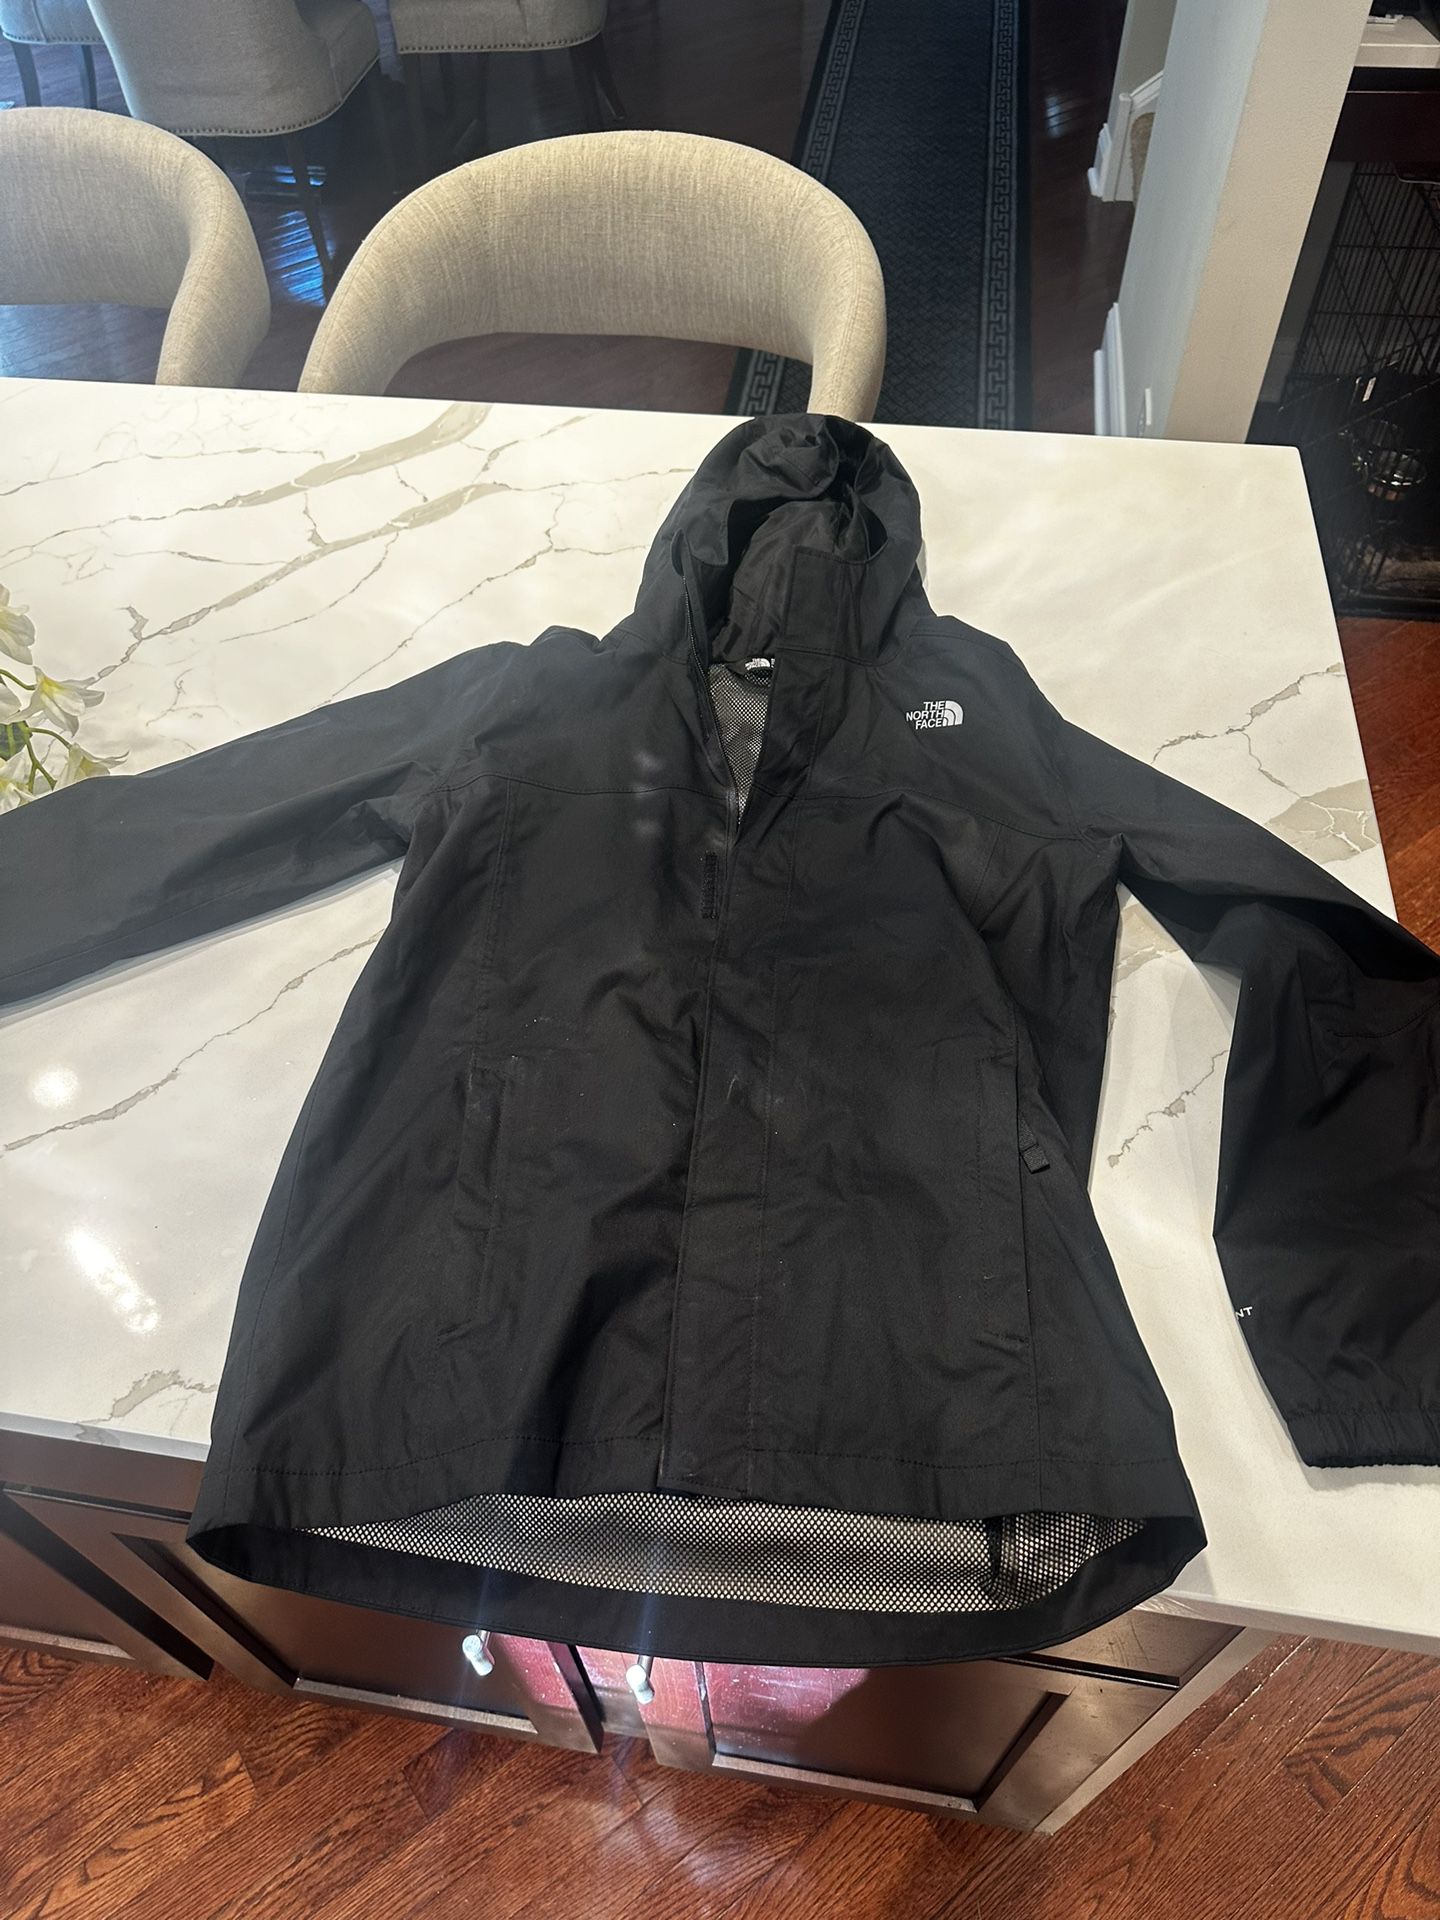 The North Face Boys Jacket